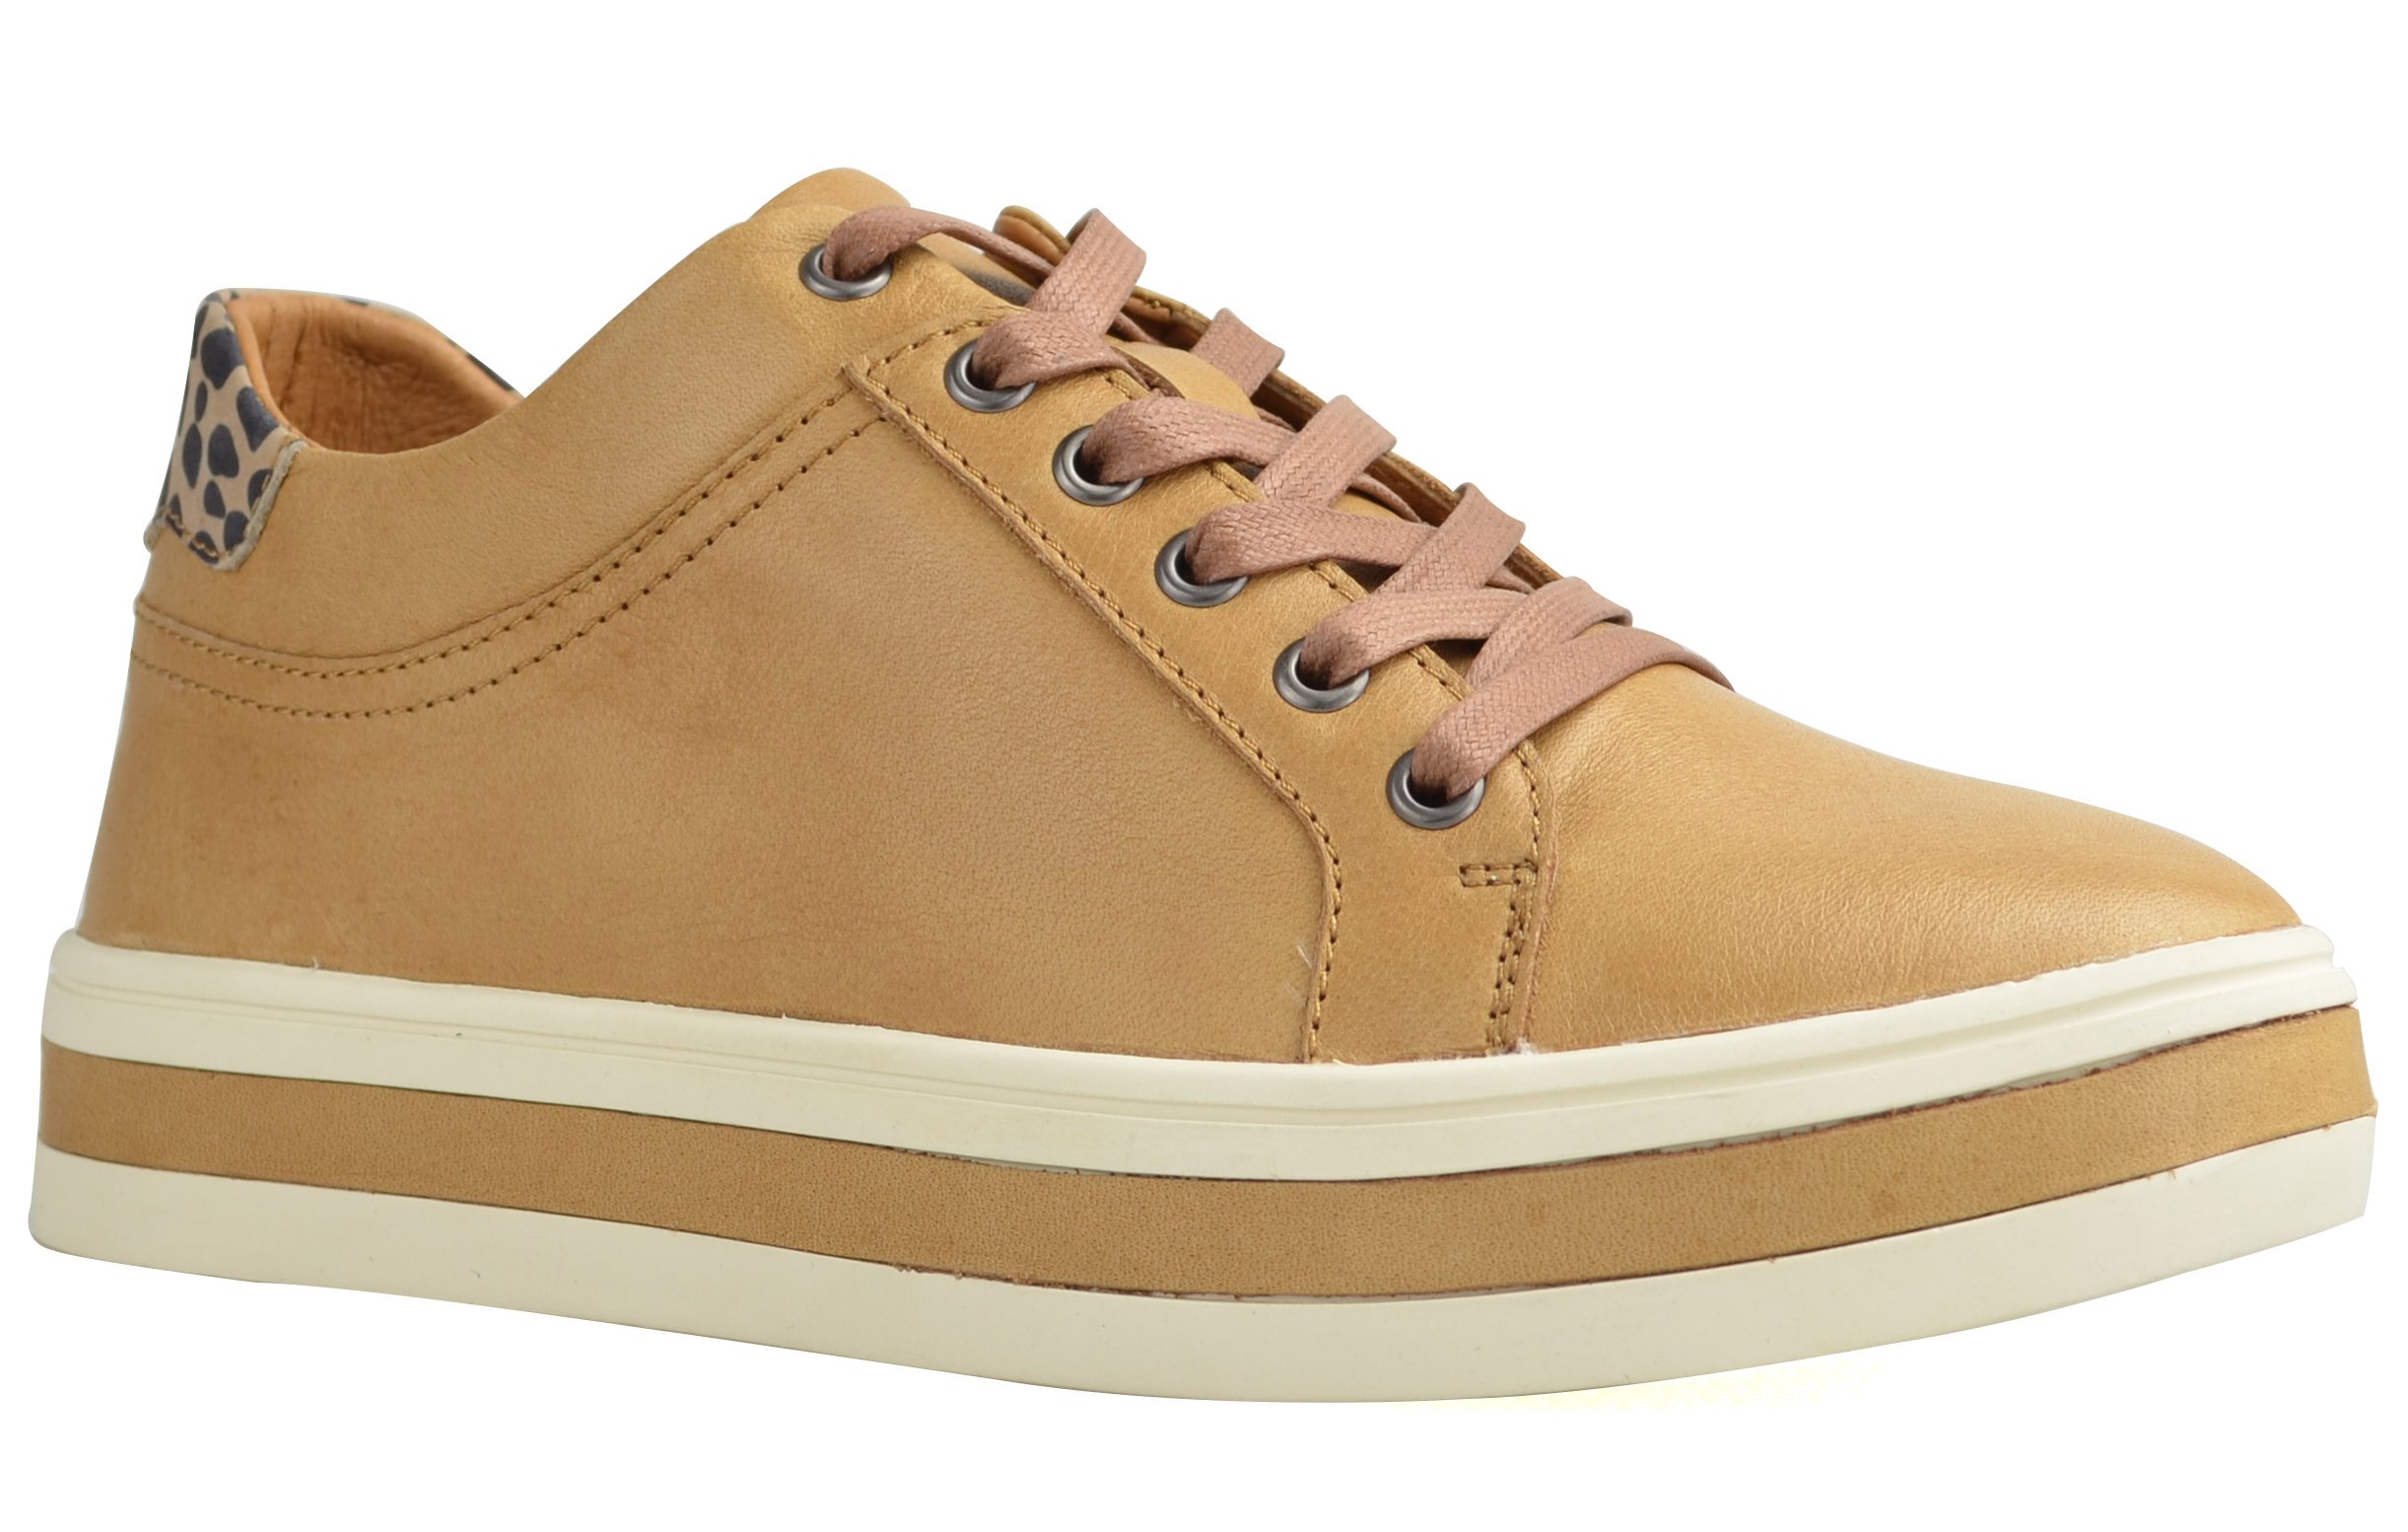 PAWS-CAMEL - Traffic Footwear Women Shoes Collection - Boston Babe ...